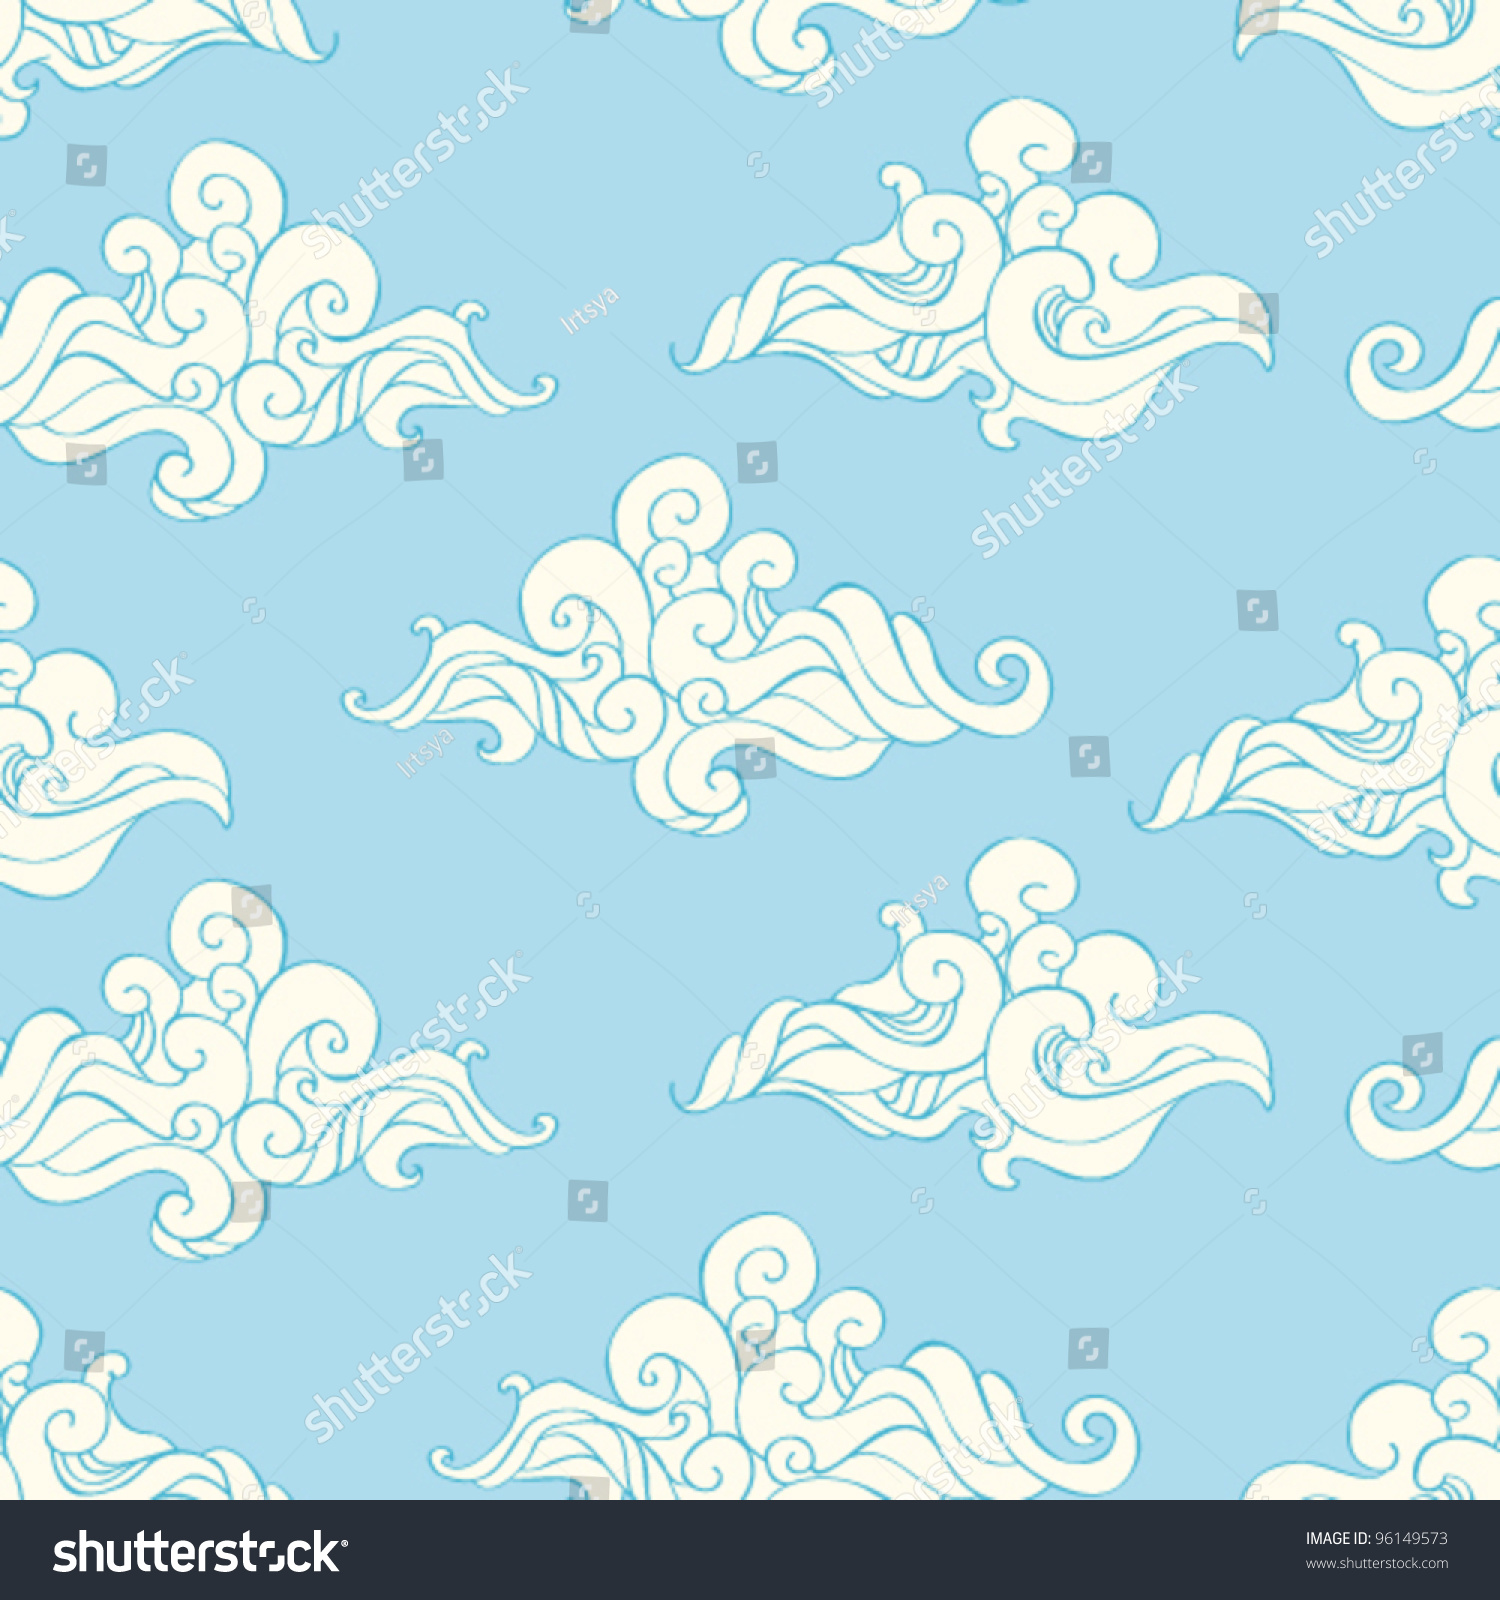 Seamless Stylized Clouds Pattern. Cute Vector Sky Background - 96149573 ...